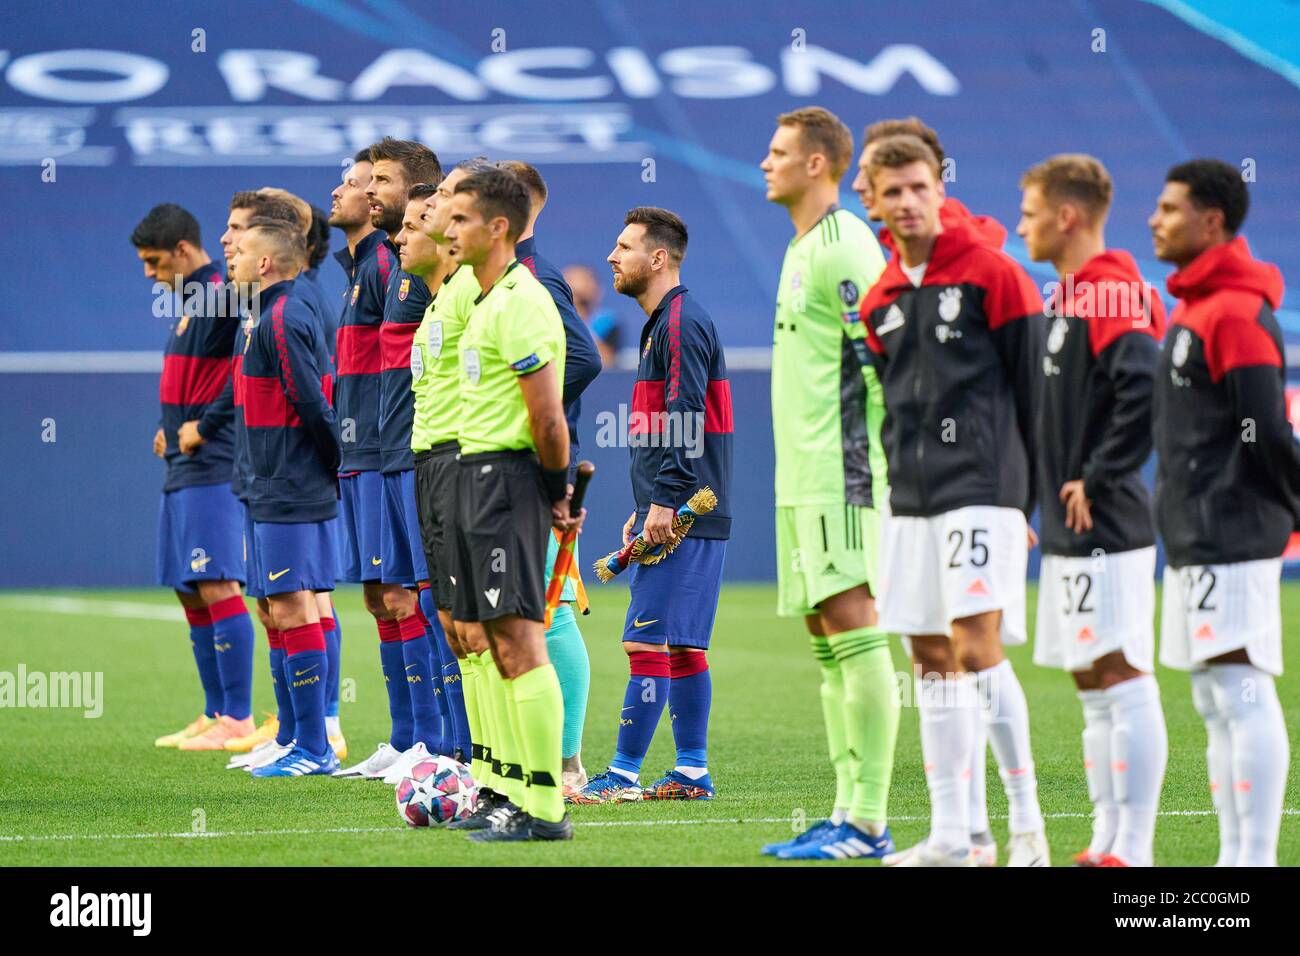 firo Champions League 08/14/2020 1/4 quarter final FC Bayern Munich, Muenchen, Munich - FC Barcelona 8: 2. teams presentation, Manuel NEUER, FCB 1 Lionel MESSI, Barca 10 Gerard PIQUE, Barca 3 Photographer: Peter Schatz/Pool/via/firosportphoto - UEFA REGULATIONS PROHIBIT ANY USE OF PHOTOGRAPHS as IMAGE SEQUENCES and/or QUASI-VIDEO - National and international News -Agencies OUT Editorial Use ONLY Our terms and conditions apply, can be viewed at www.firosportphoto.de, §ONLY FOR USE IN GERMANY !!!!!! copyright by firo sportphoto: Coesfelder Str. 207 D-48249 Dulmen www.firosportphoto.de ma Stock Photo